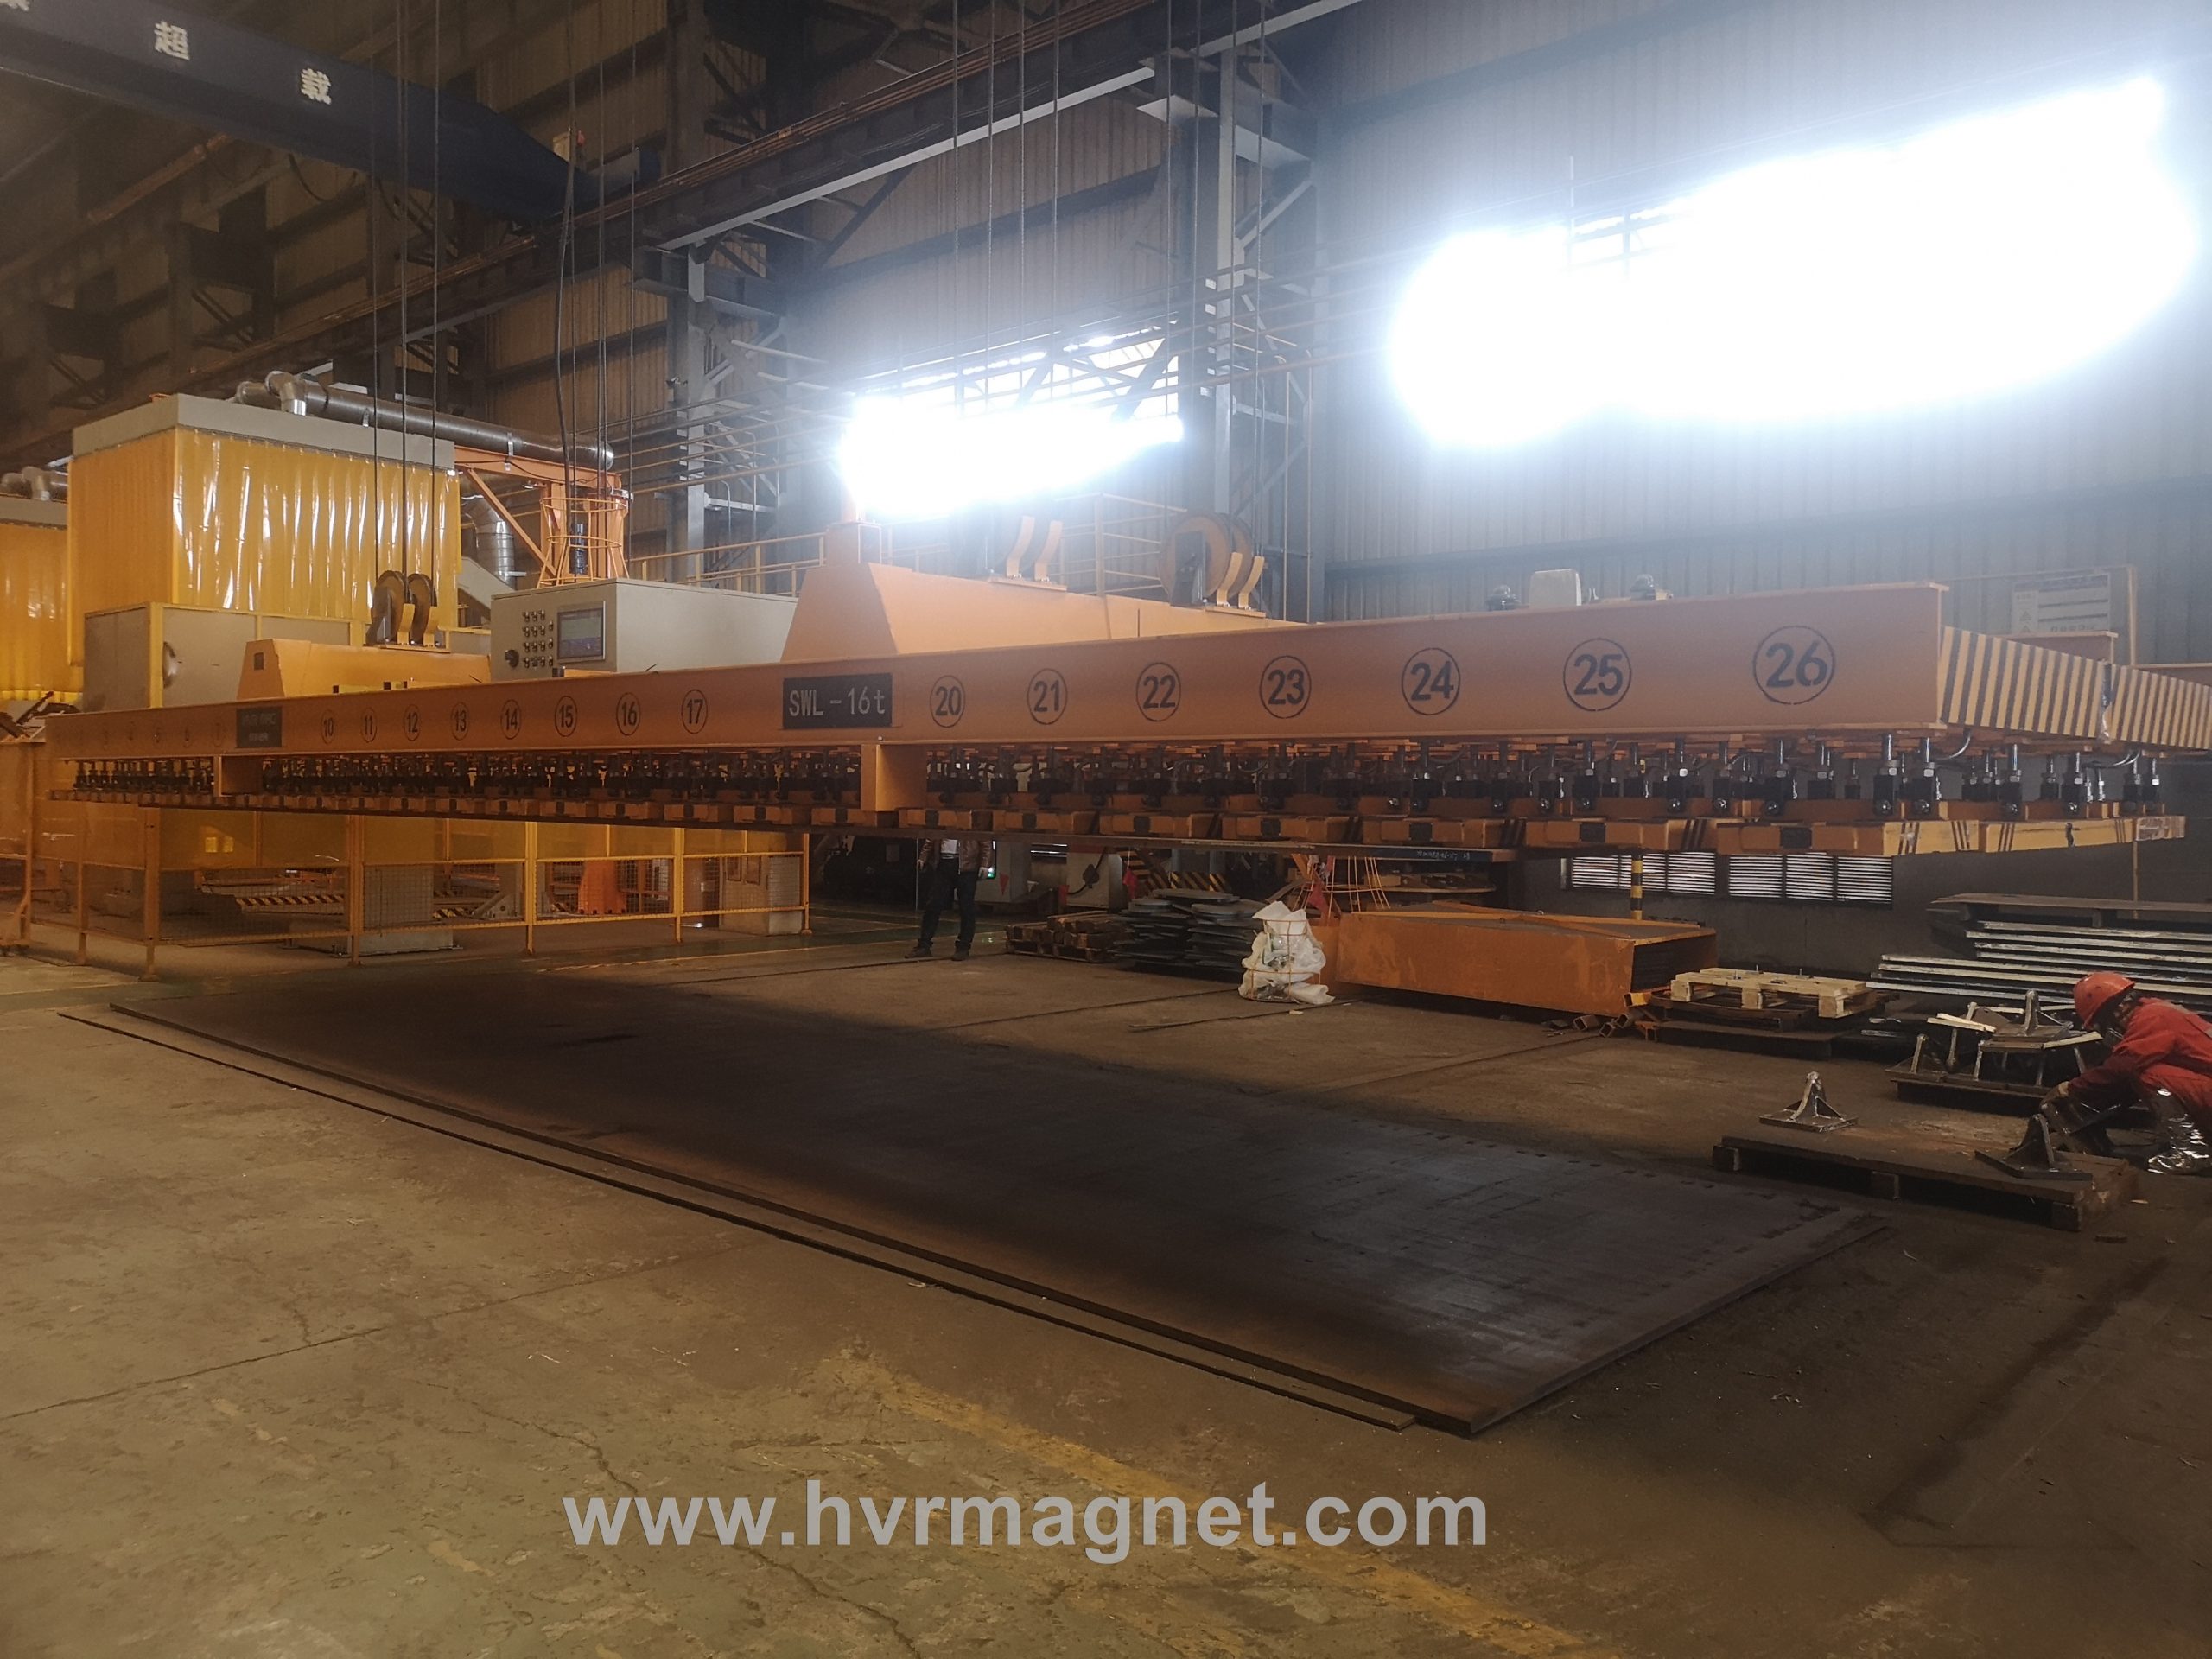 16 ton magnetic lifting system for unloading steel cut parts for cutting table - HVR MAG